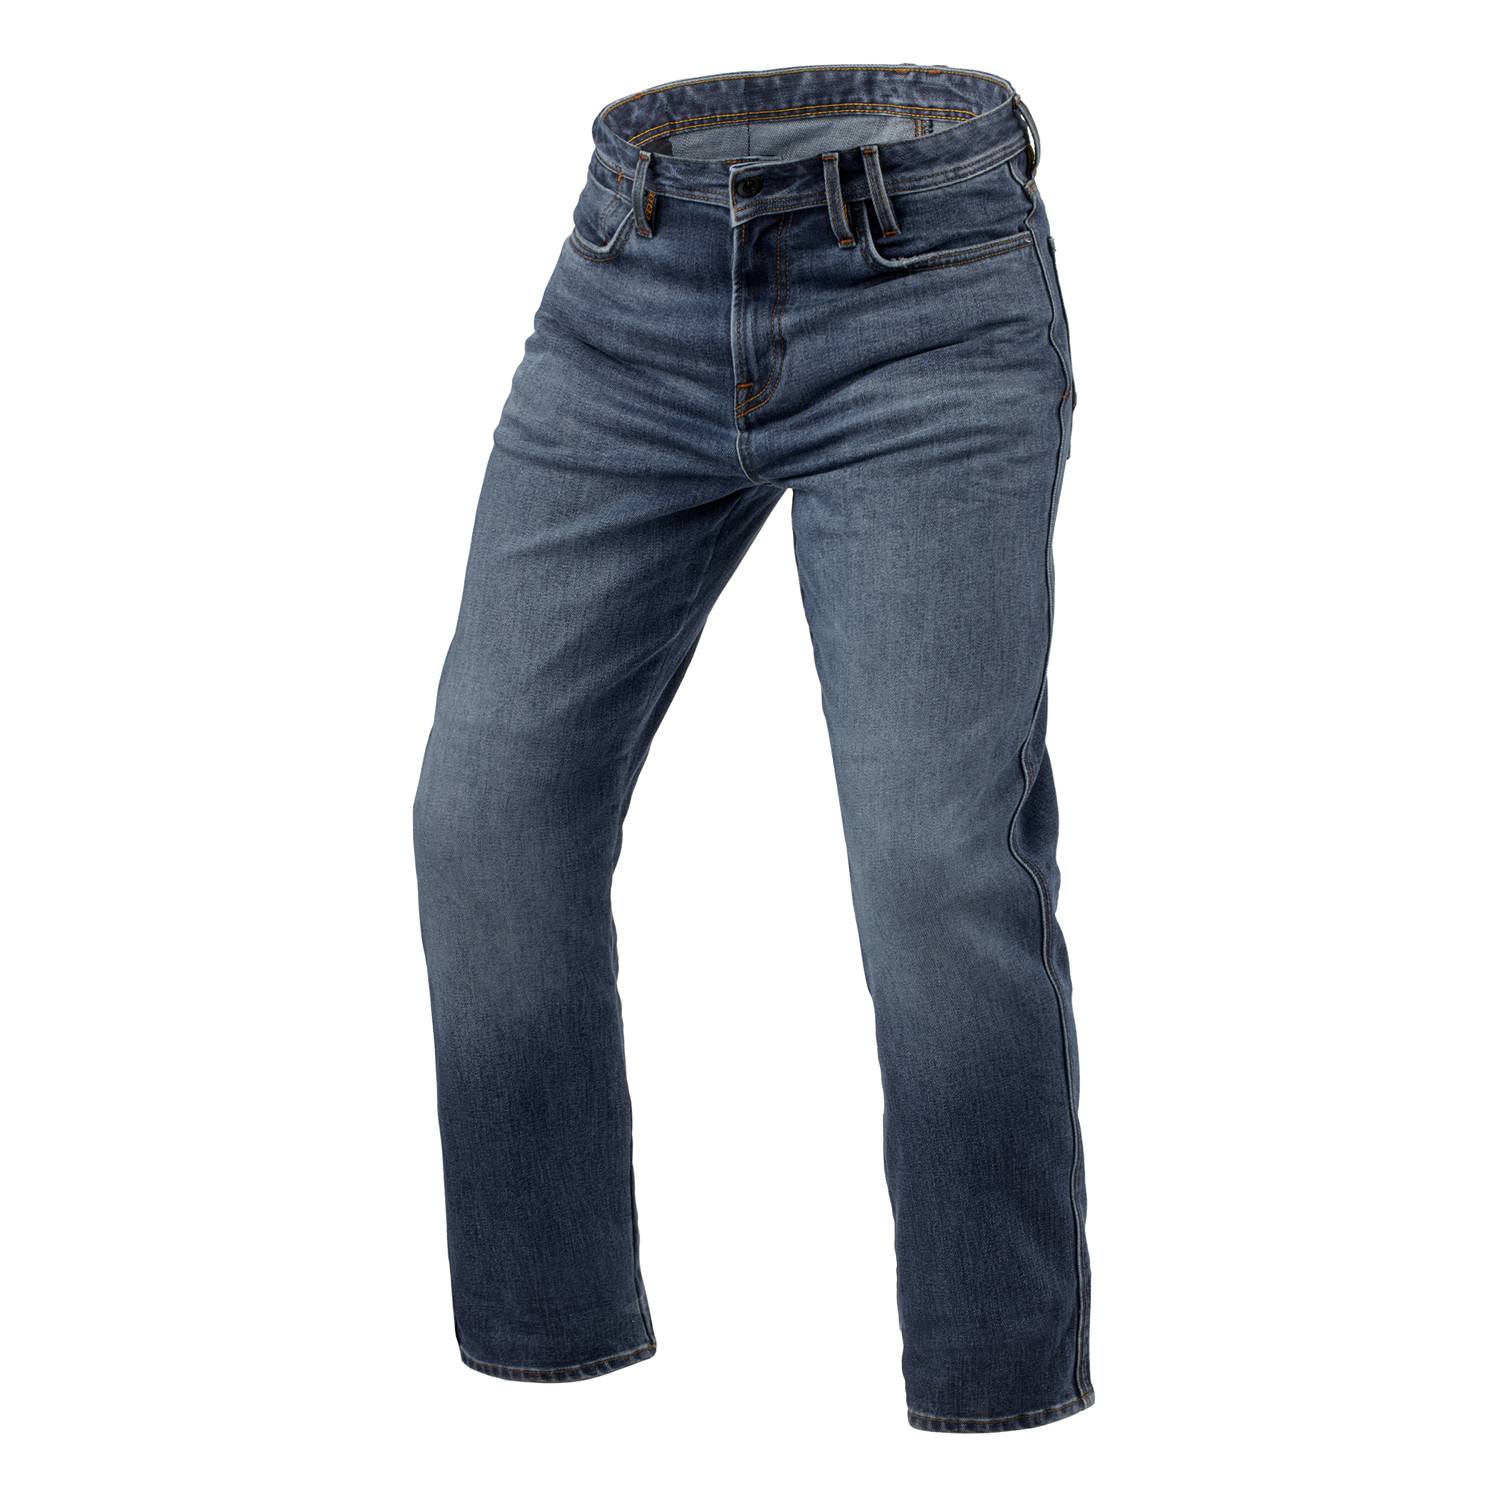 Image of EU REV'IT! Jeans Lombard 3 RF Medium Blue Stone L36 Motorcycle Jeans Taille L36/W32